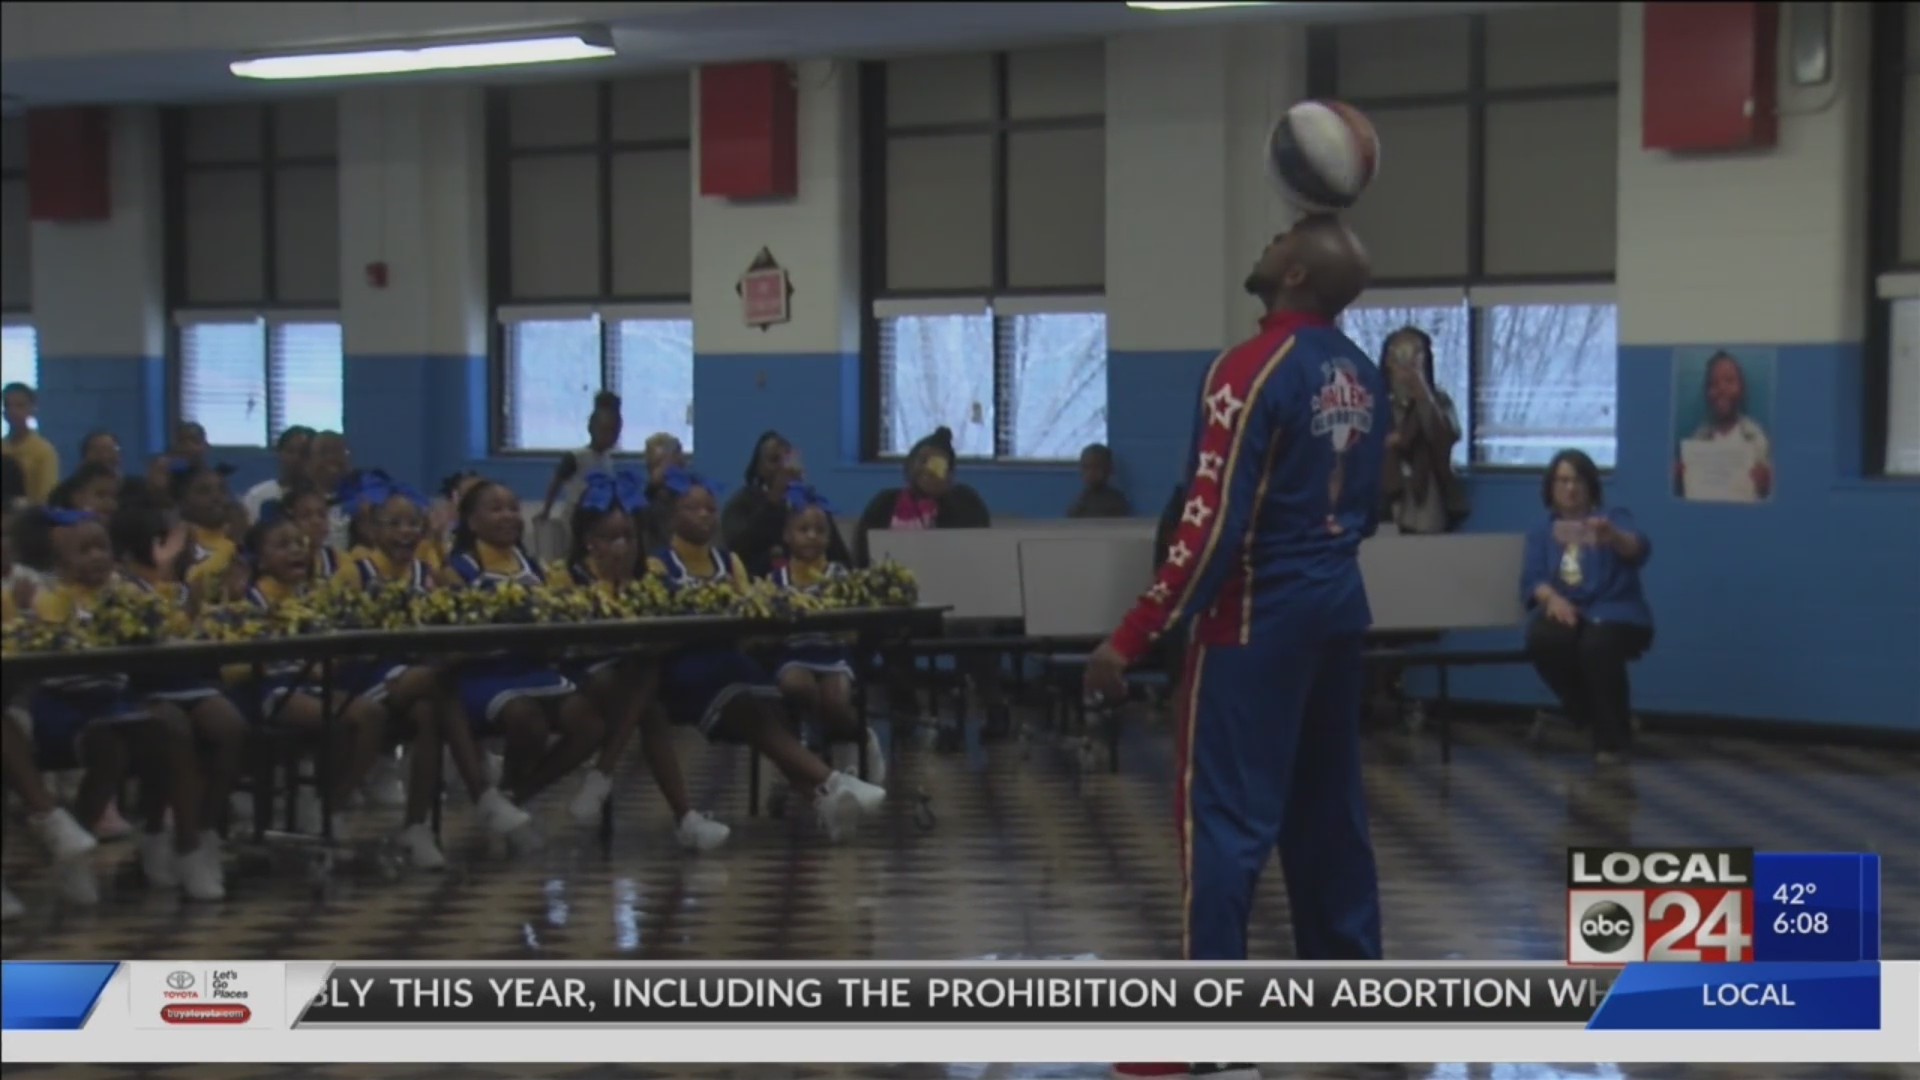 Harlem Globetrotters fight back against bullying during visit to Delano Elementary